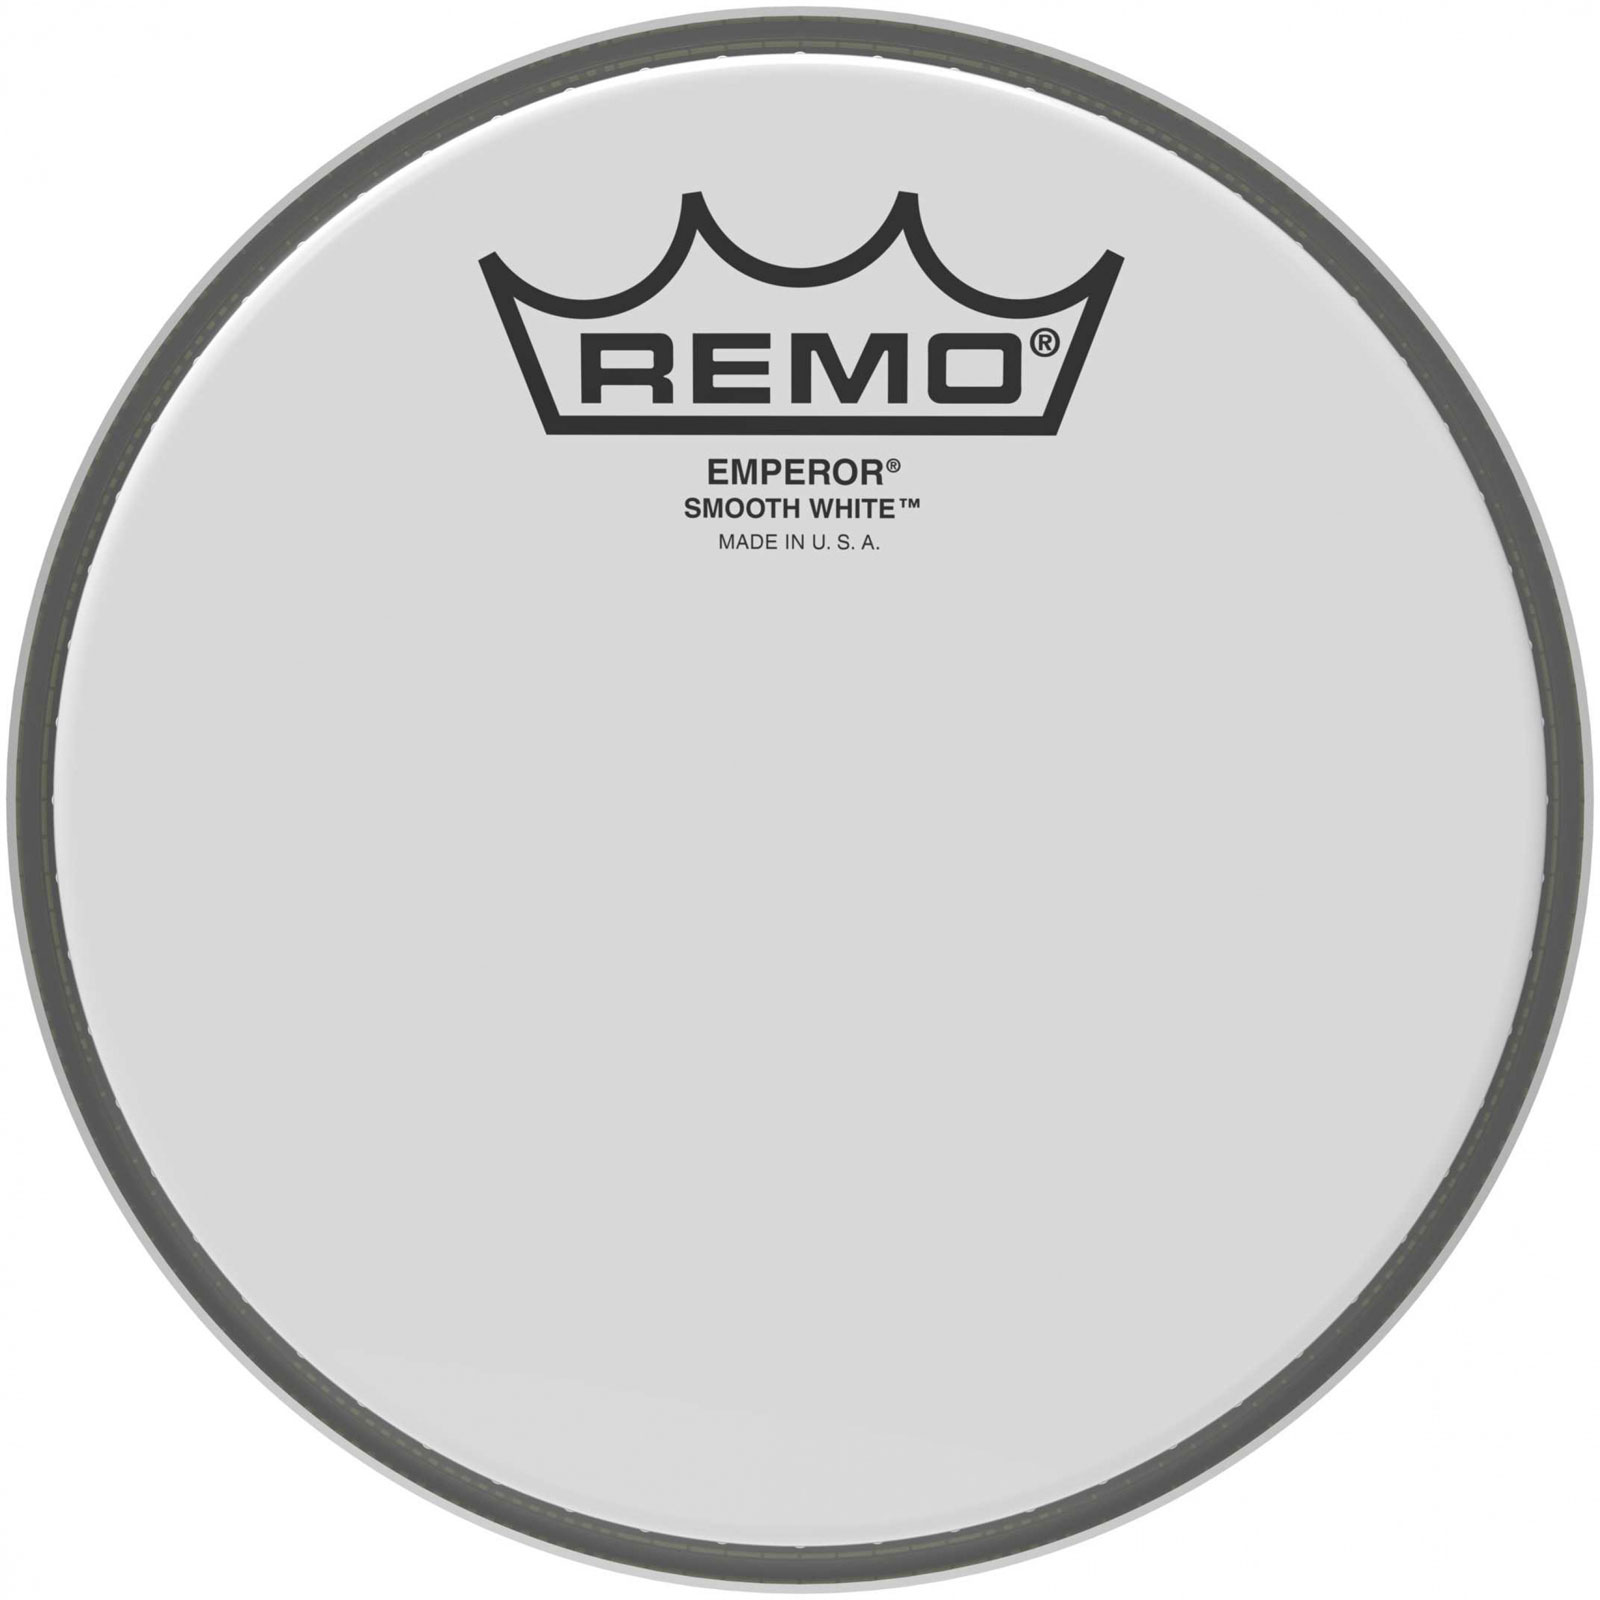 REMO EMPEROR 6 - SMOOTH WHITE - BE-0206-00